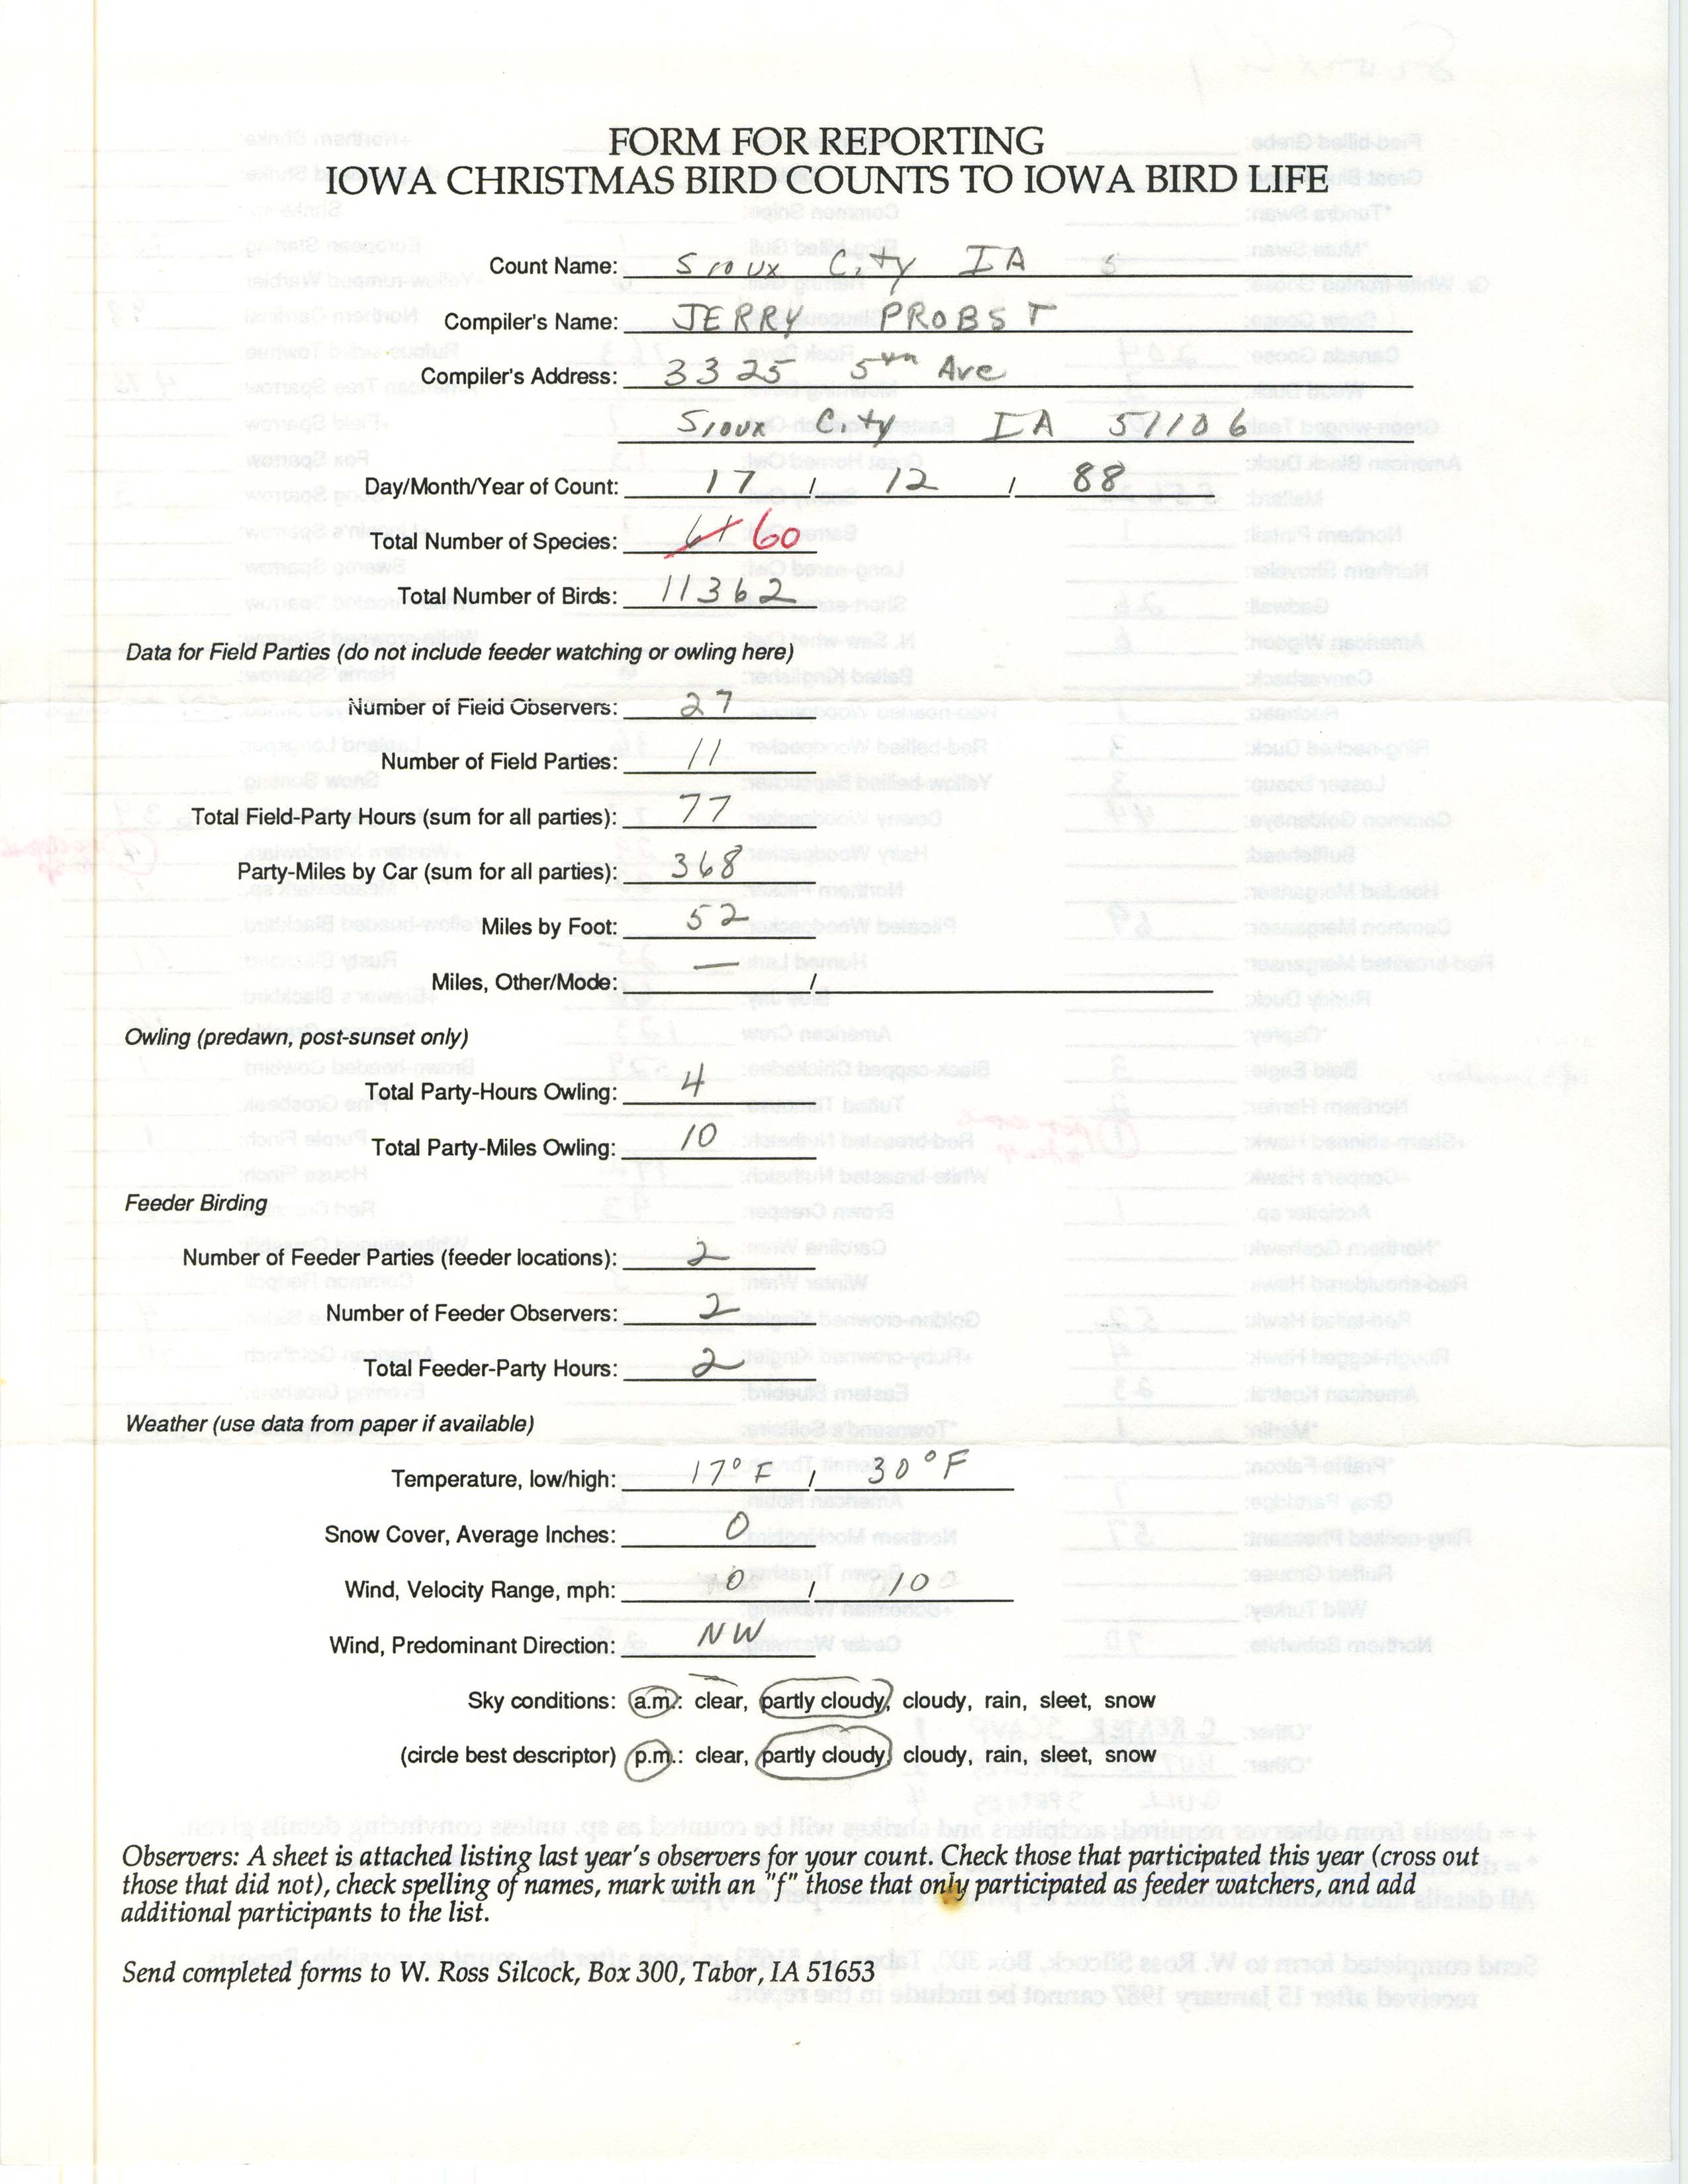 Form for reporting Iowa Christmas bird counts to Iowa Bird Life, Jerry Probst, December 17, 1988